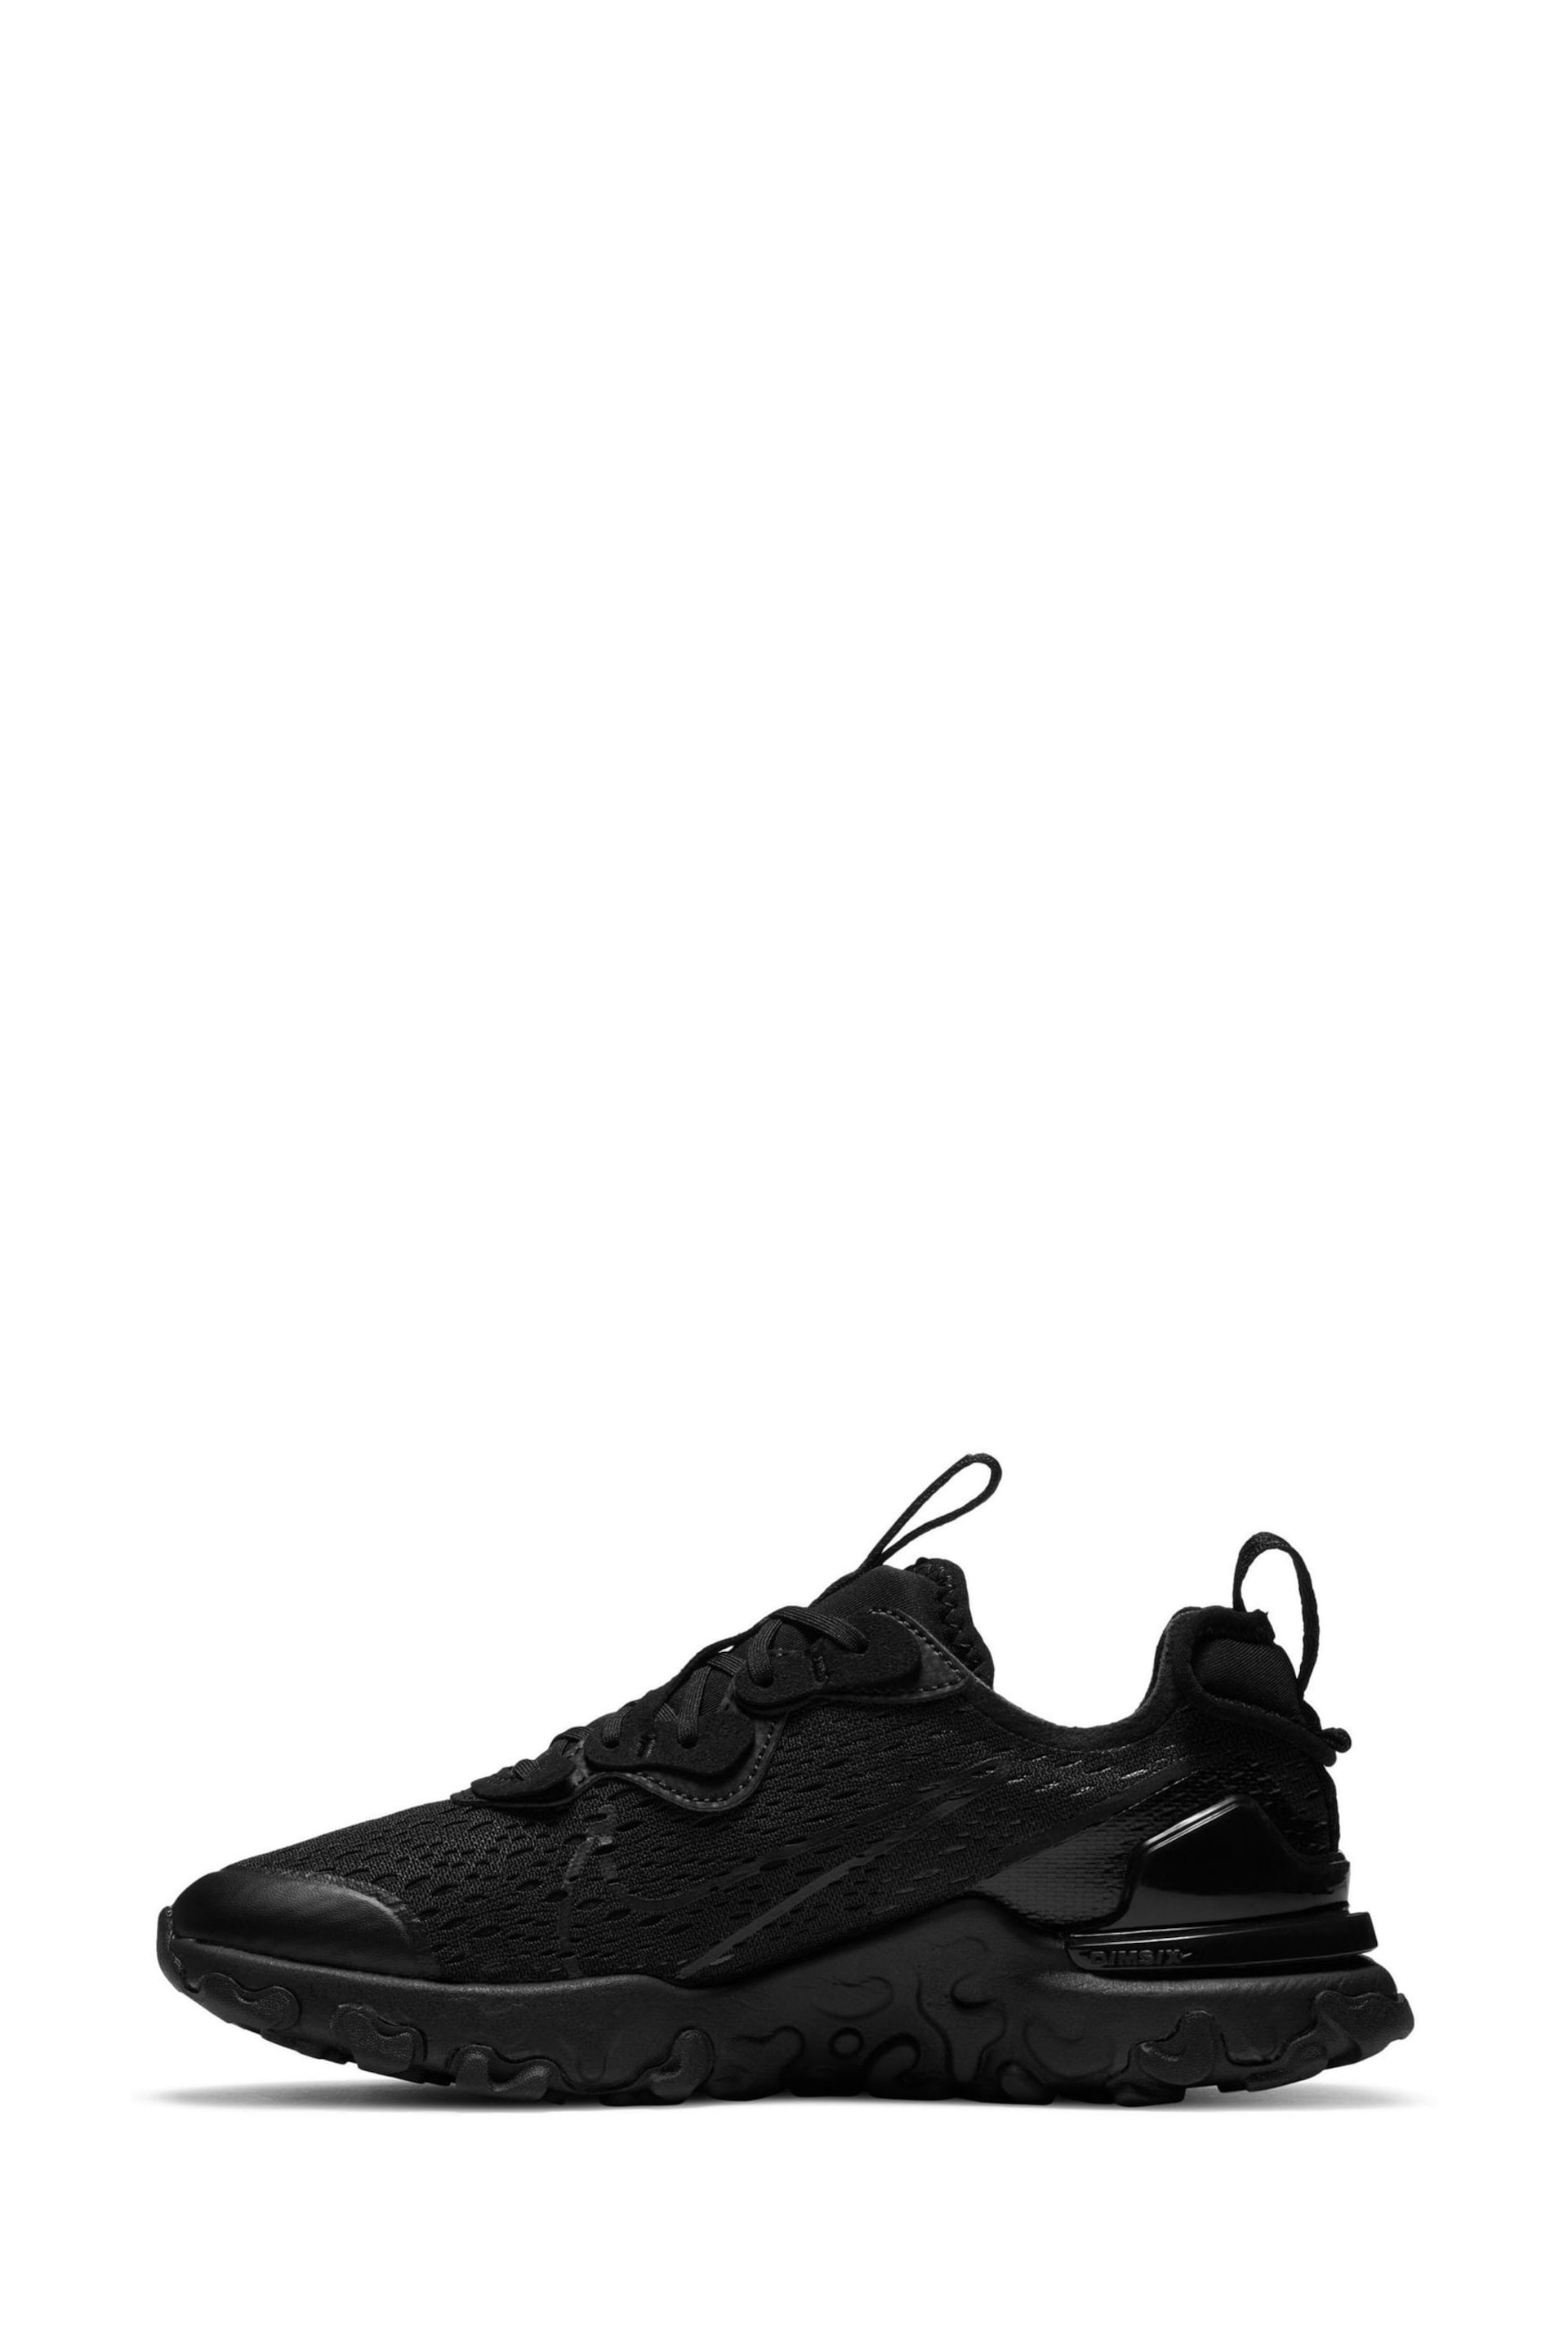 Nike Black React Vision Youth Trainers - Image 4 of 10